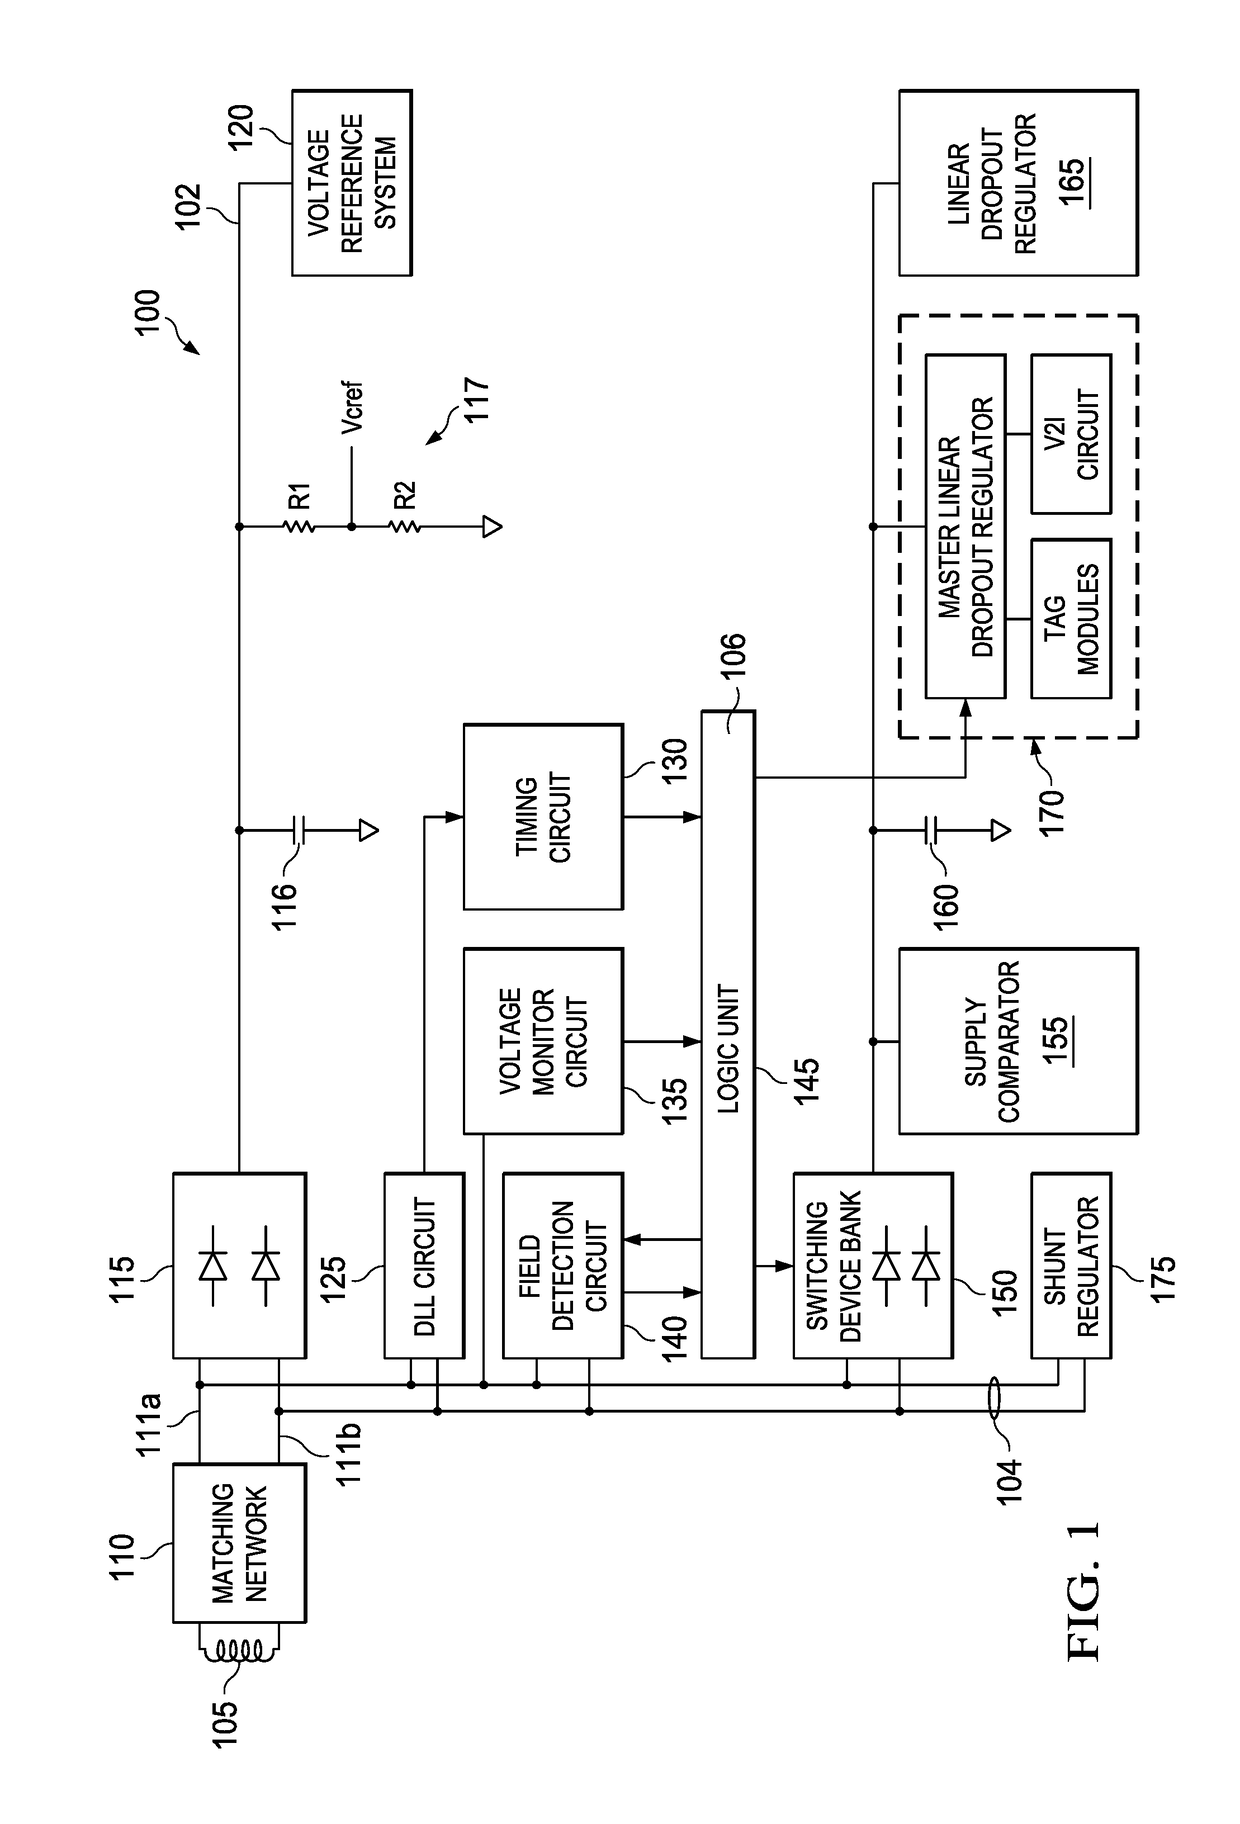 Power harvest architecture for near field communication devices